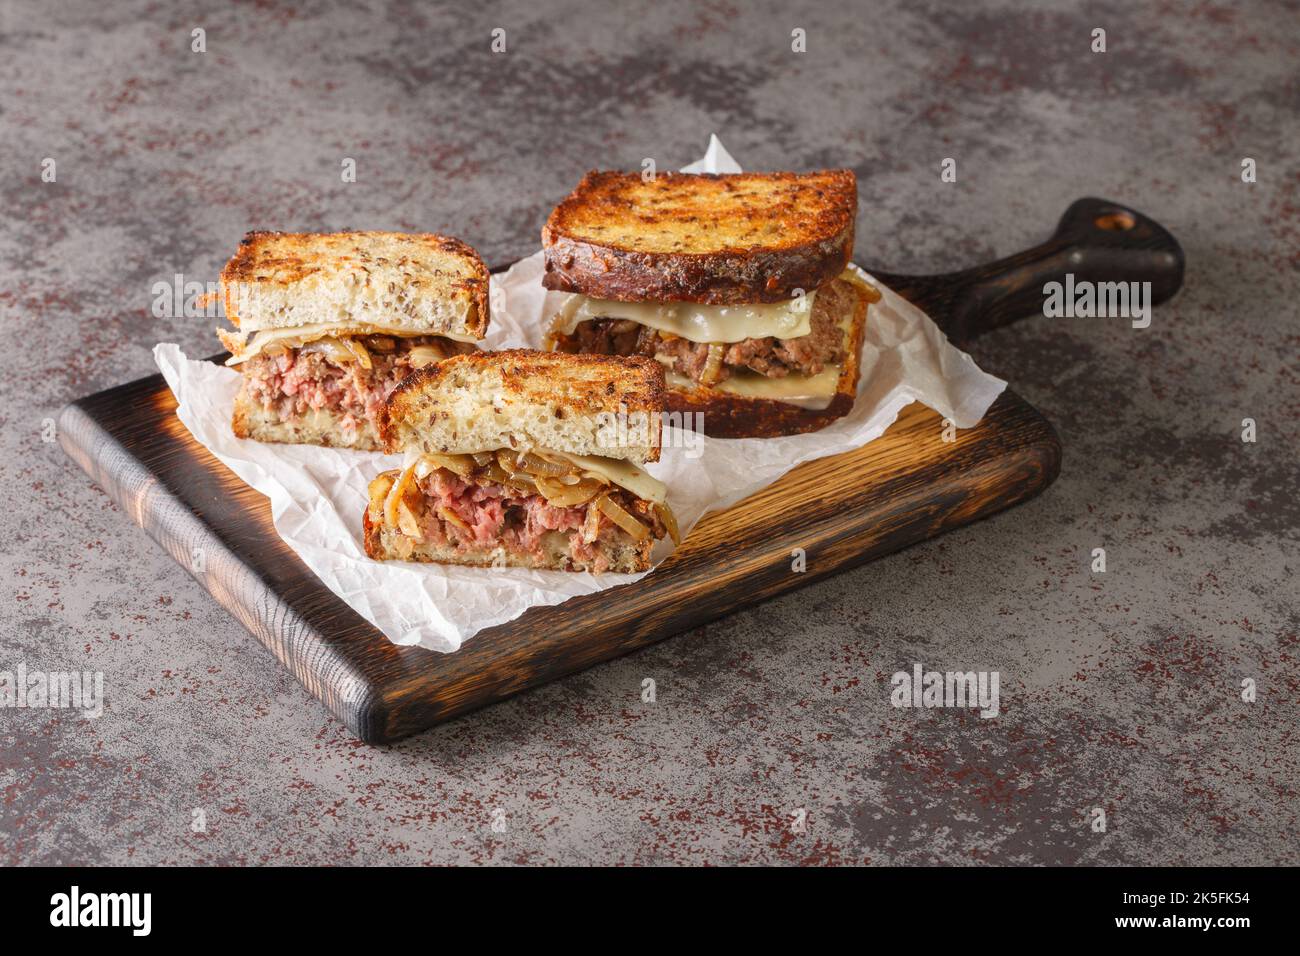 patty melt sandwich has a burger patty covered with melted Swiss cheese, caramelized onions, and griddled slices of rye bread closeup on the wooden bo Stock Photo